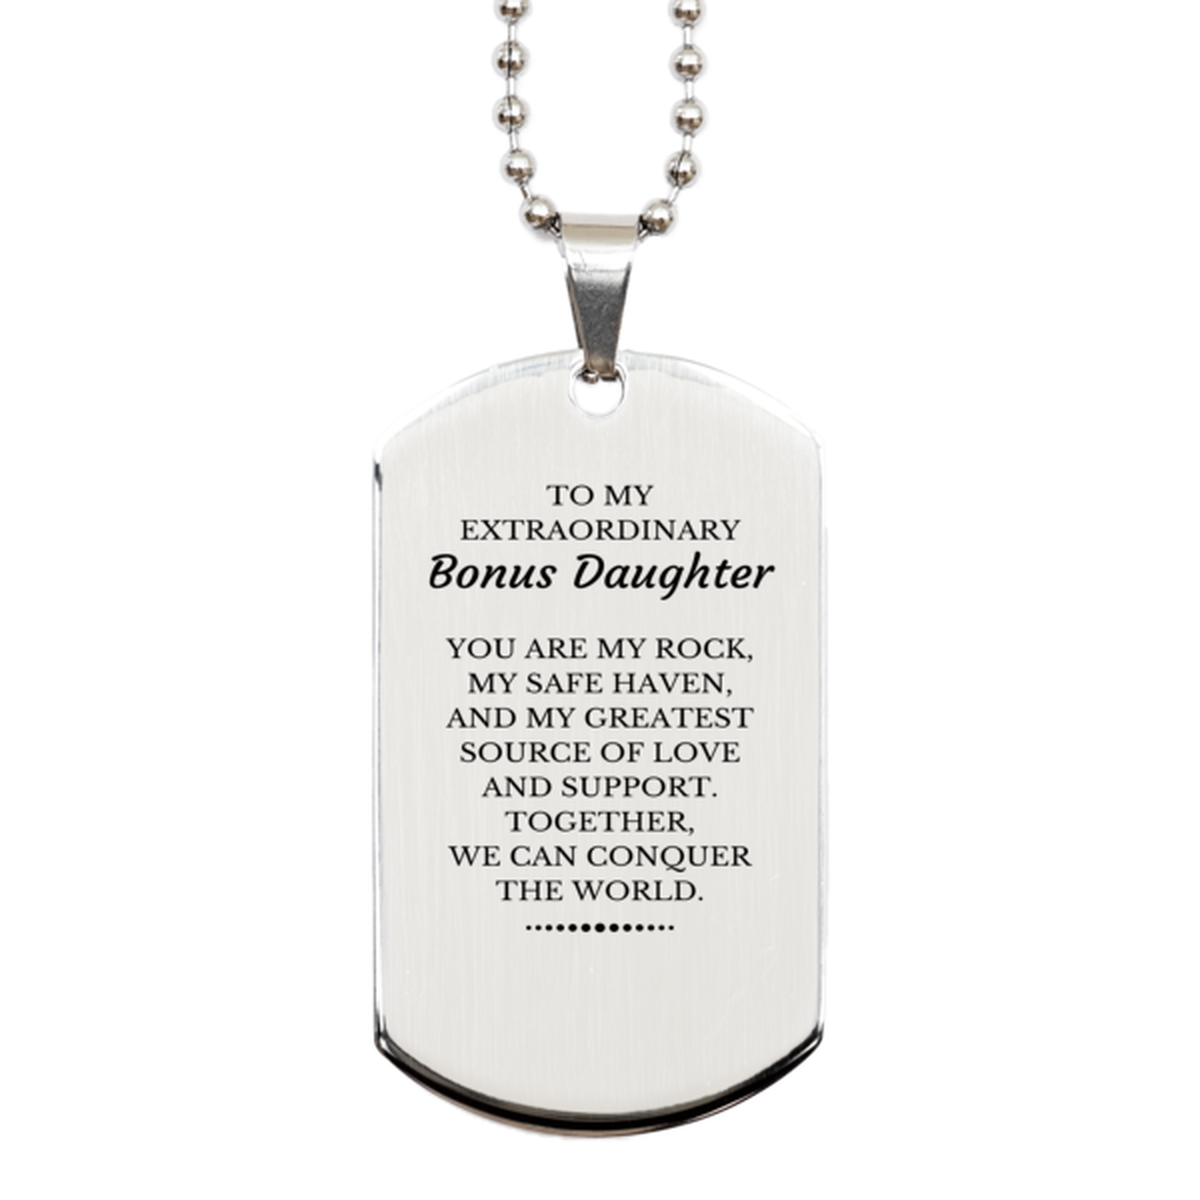 To My Extraordinary Bonus Daughter Gifts, Together, we can conquer the world, Birthday Silver Dog Tag For Bonus Daughter, Christmas Gifts For Bonus Daughter